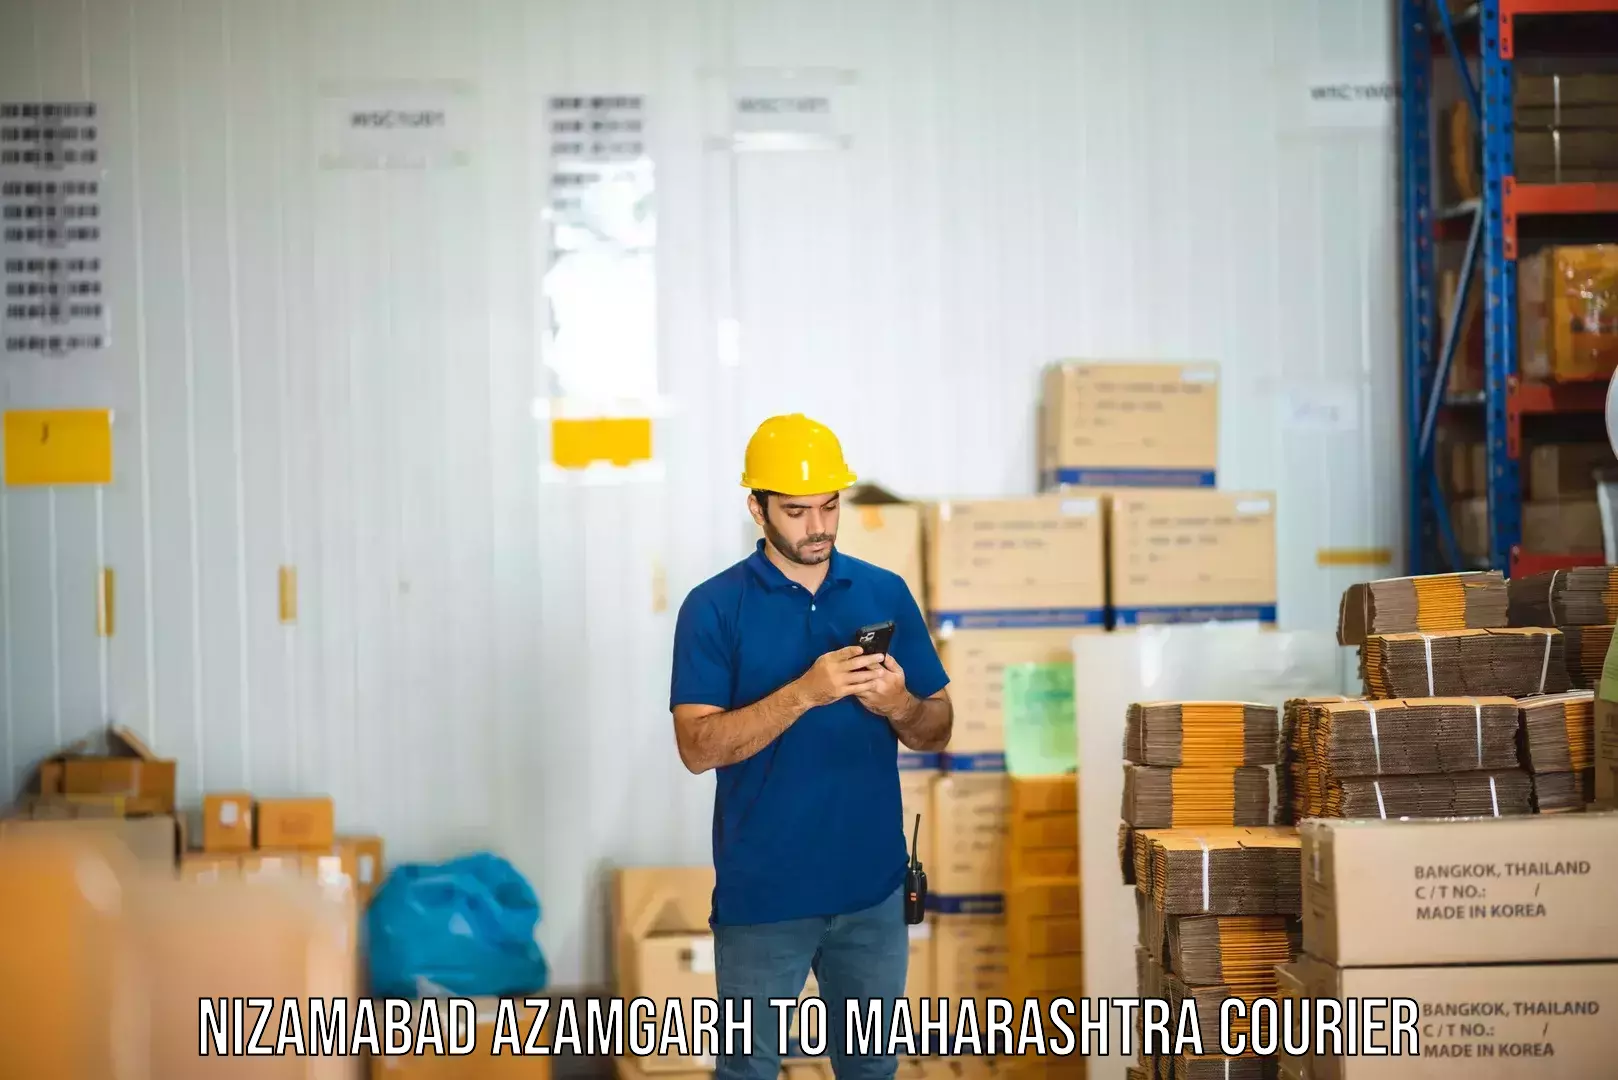 Quality courier services Nizamabad Azamgarh to SVKMs Narsee Monjee Institute of Management Studies Mumbai